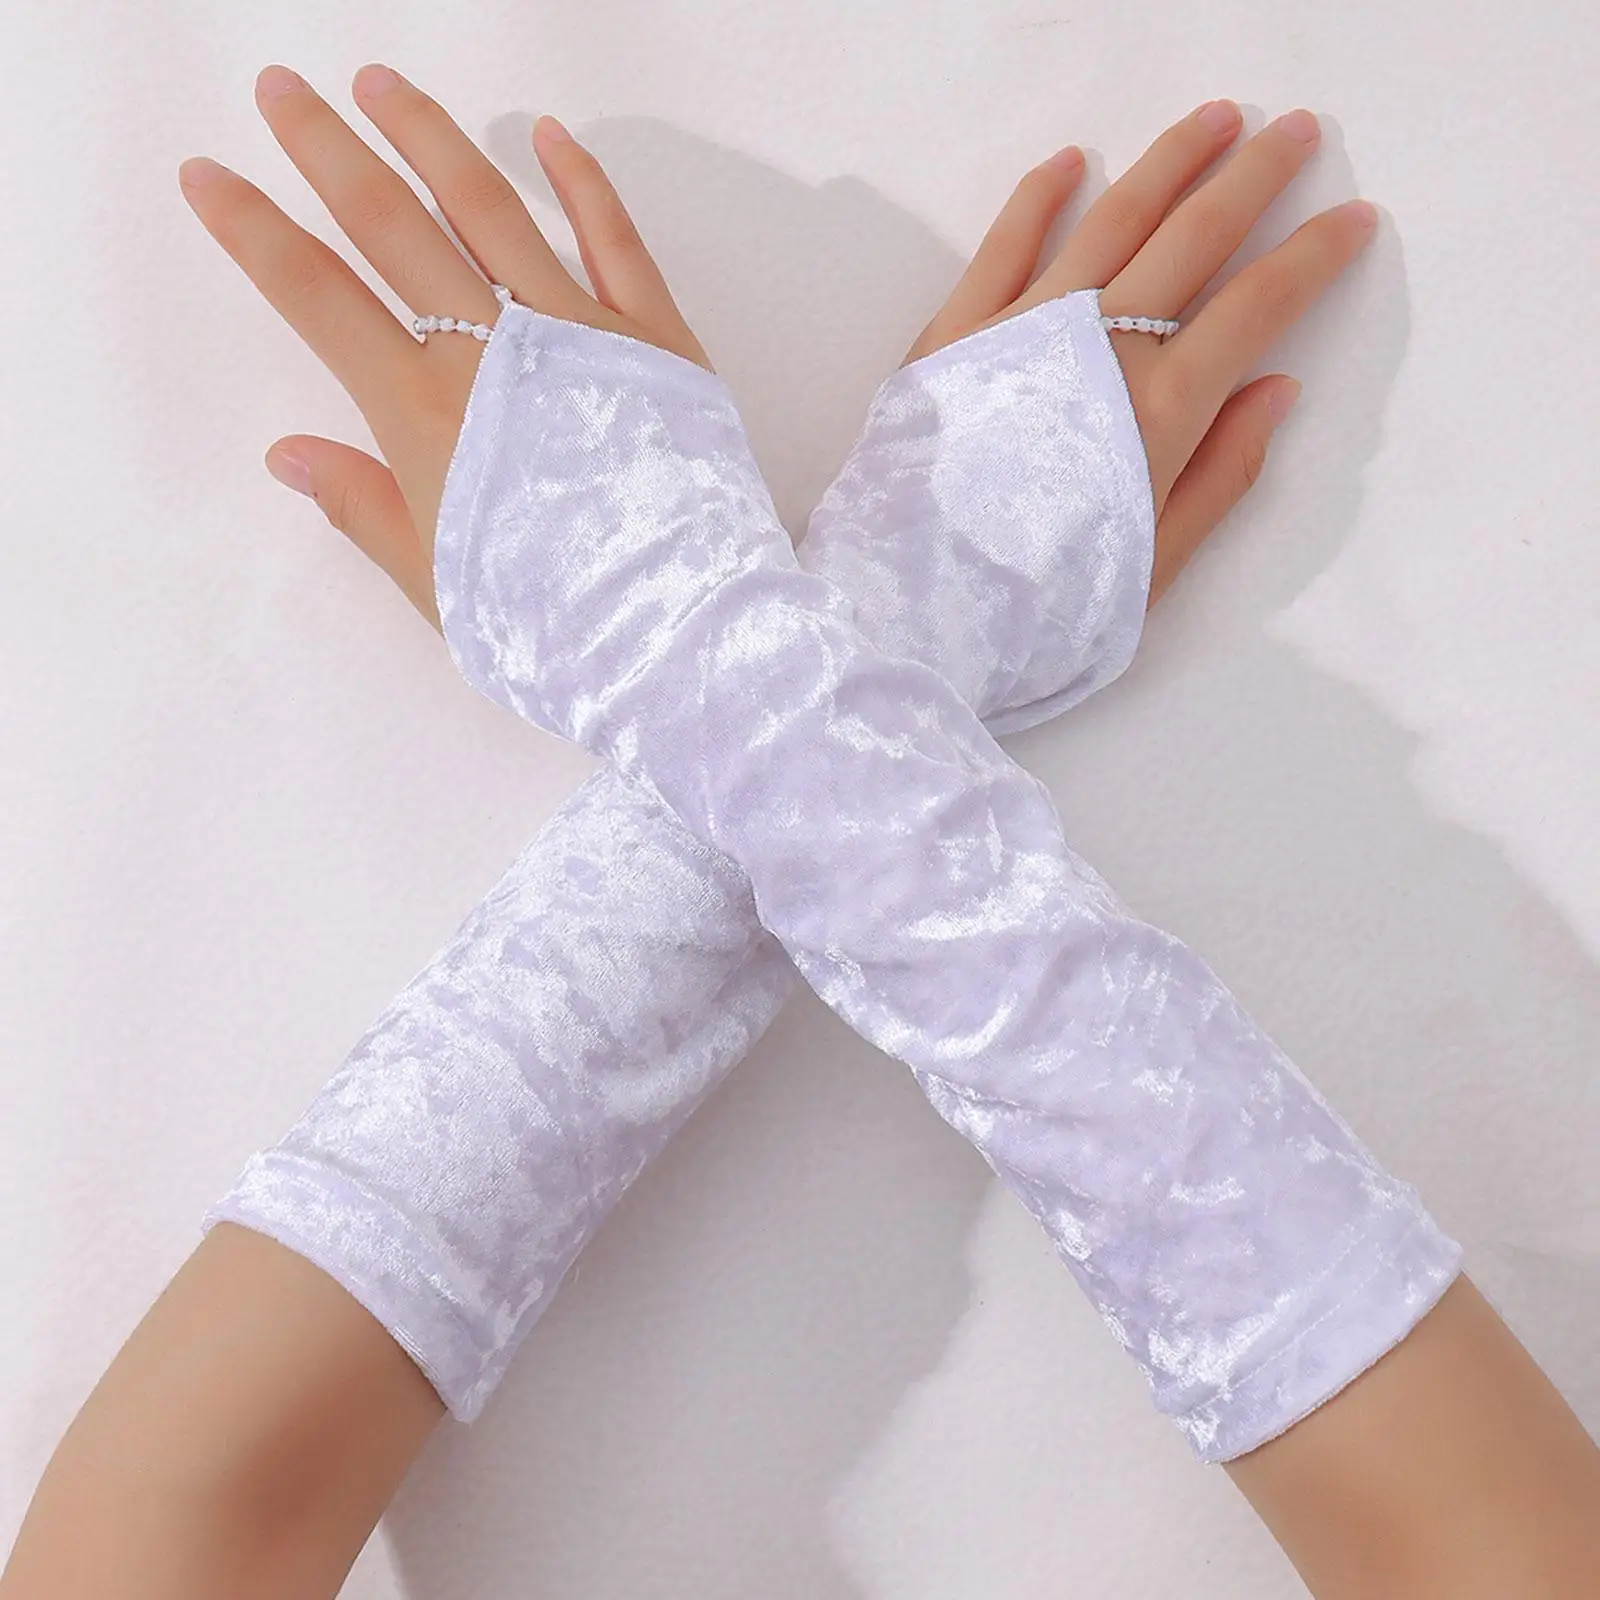 Classic Fingerless Gloves Arm Warmers Cosplay Long Gloves Sun Protection Mittens